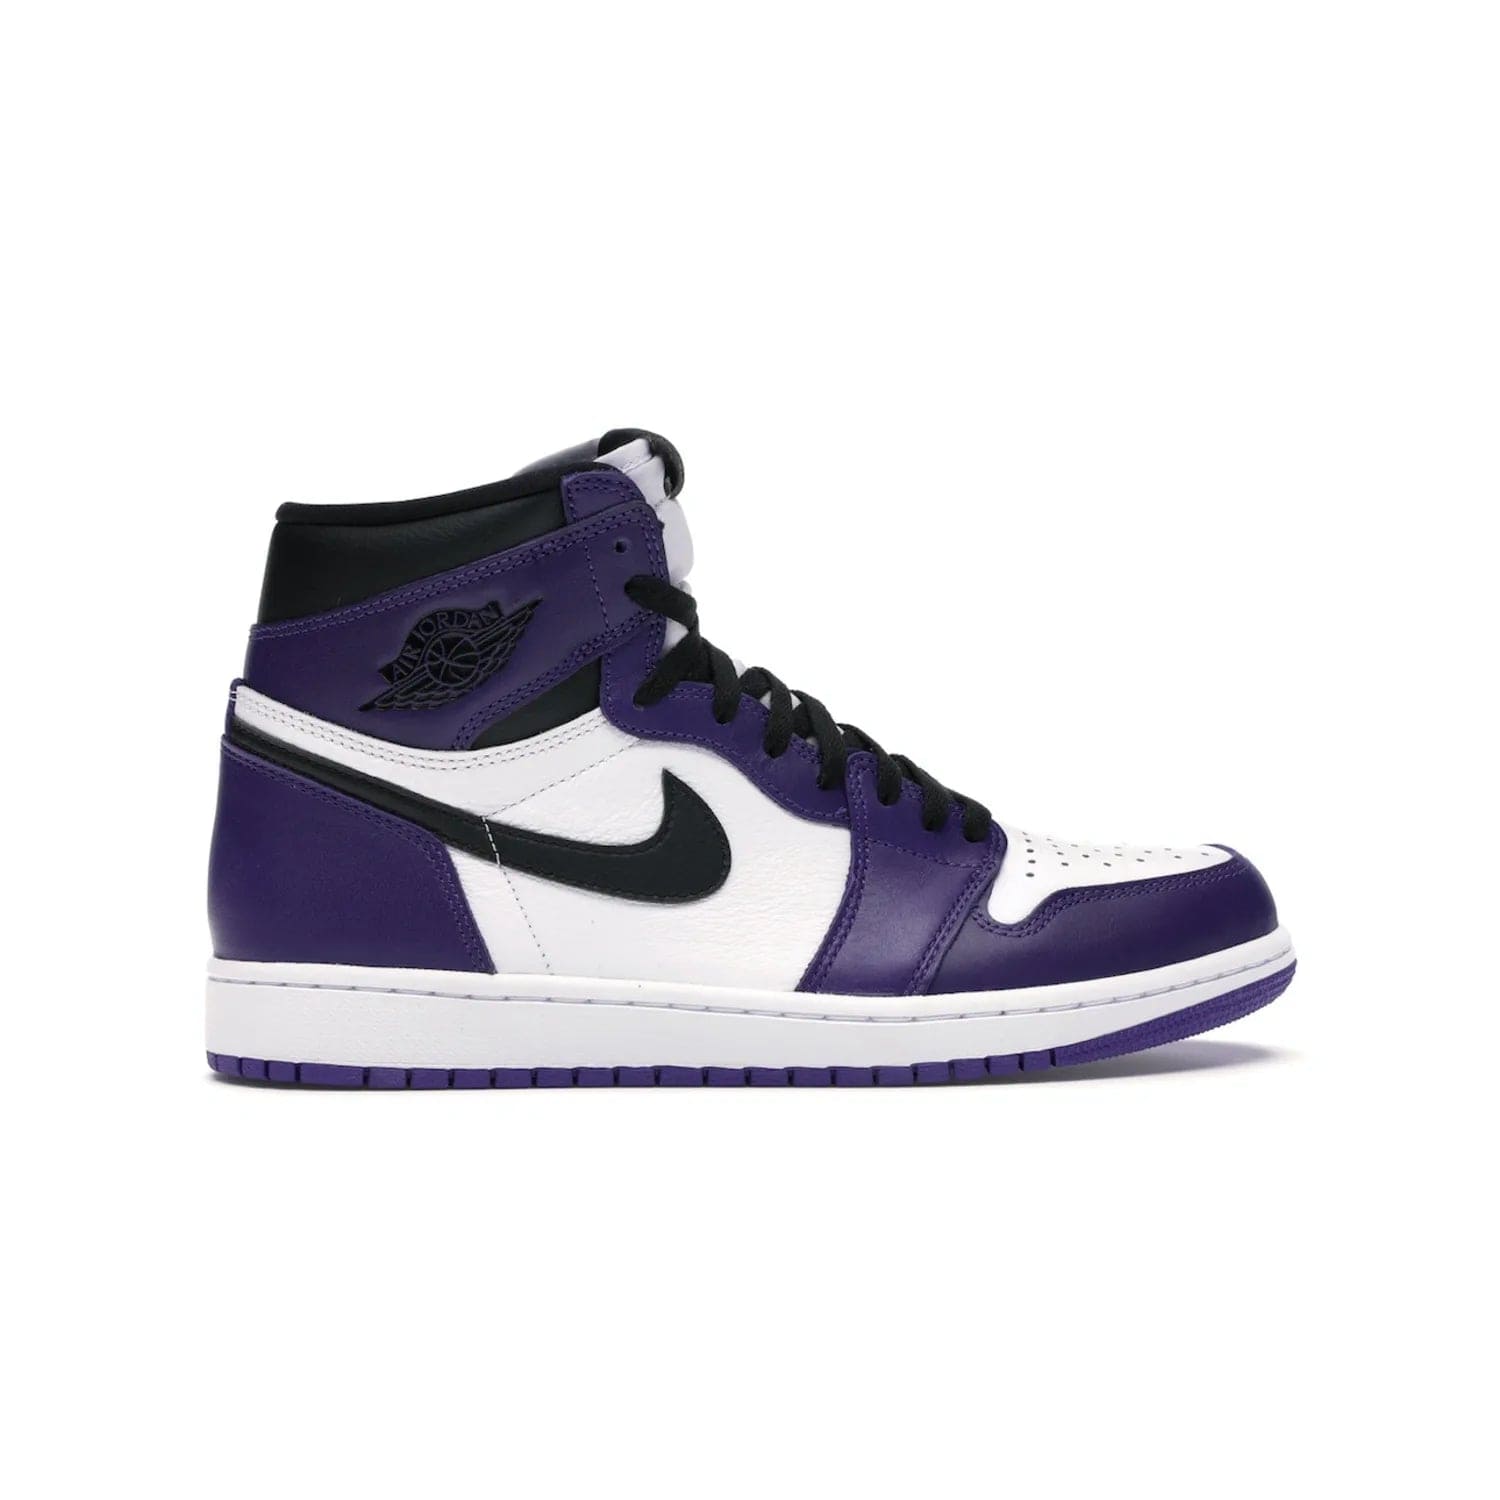 Jordan 1 Retro High Court Purple White - Image 36 - Only at www.BallersClubKickz.com - Grab the classic Jordan 1 Retro High Court Purple White and add major flavor to your collection. White leather upper with Court Purple overlays and Swoosh logo. White midsole and purple outsole. Get yours and rep your Jordan Brand.